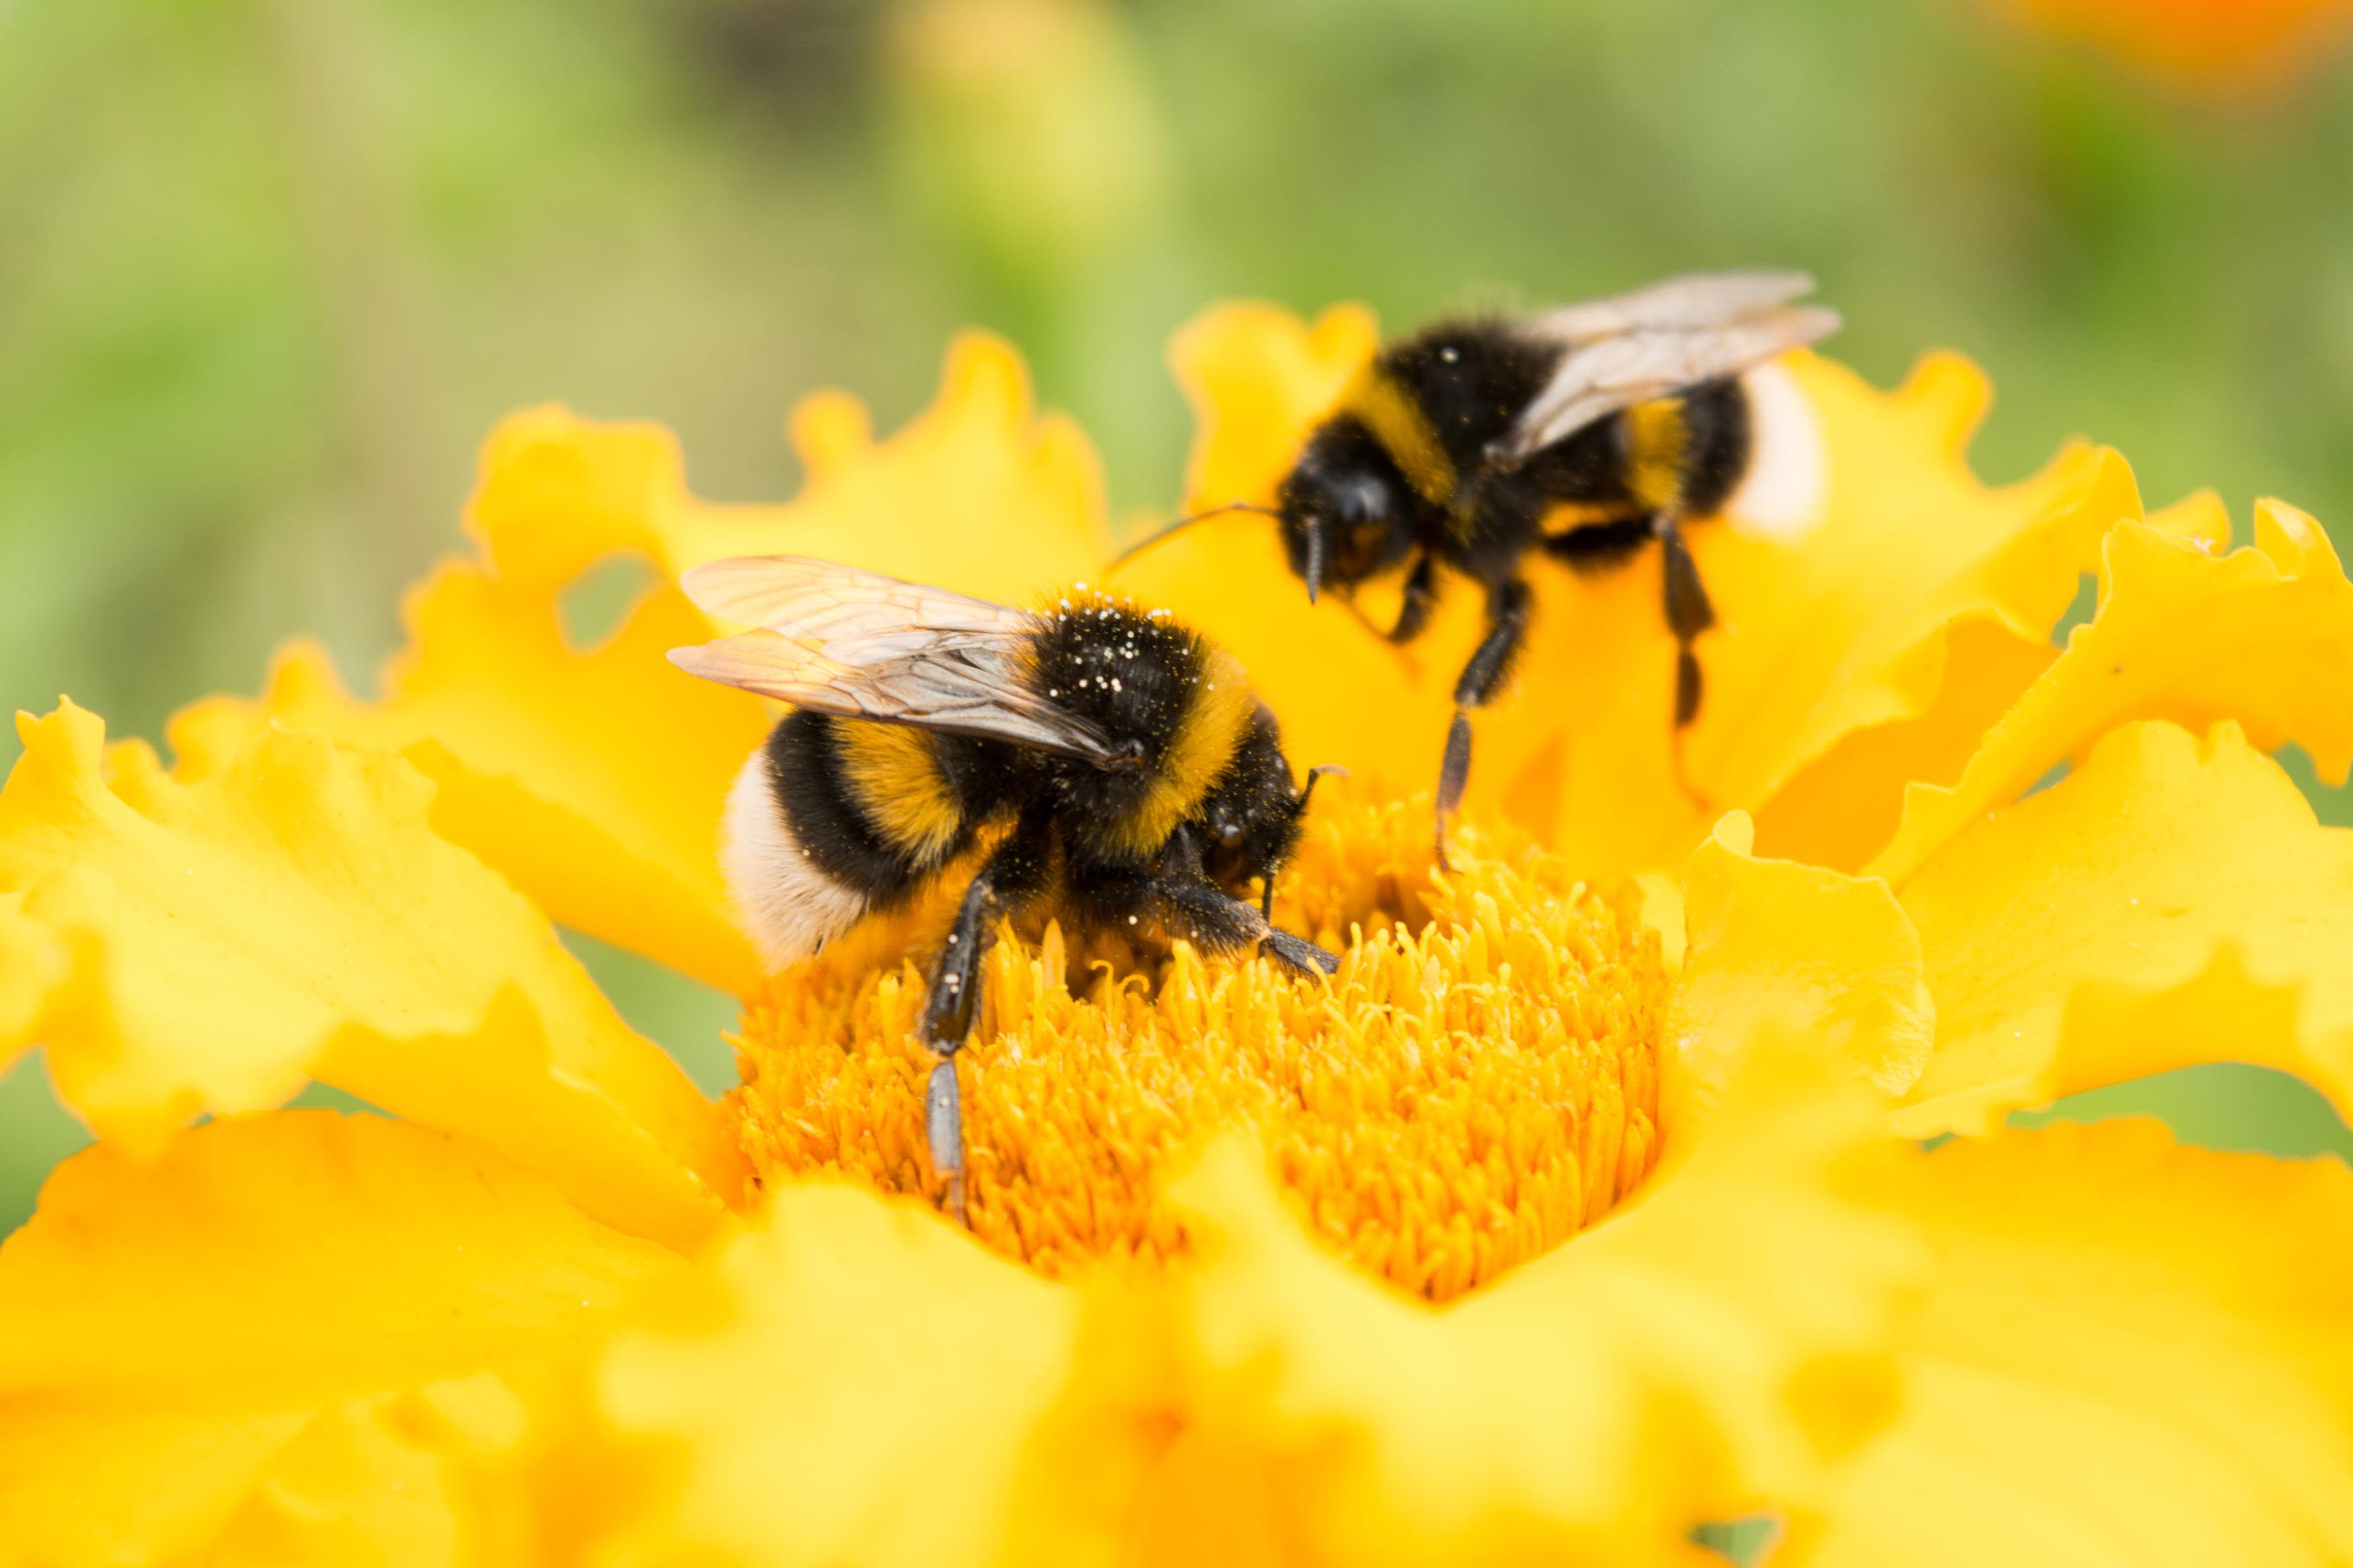 Save the bumble bees by planting these flowers